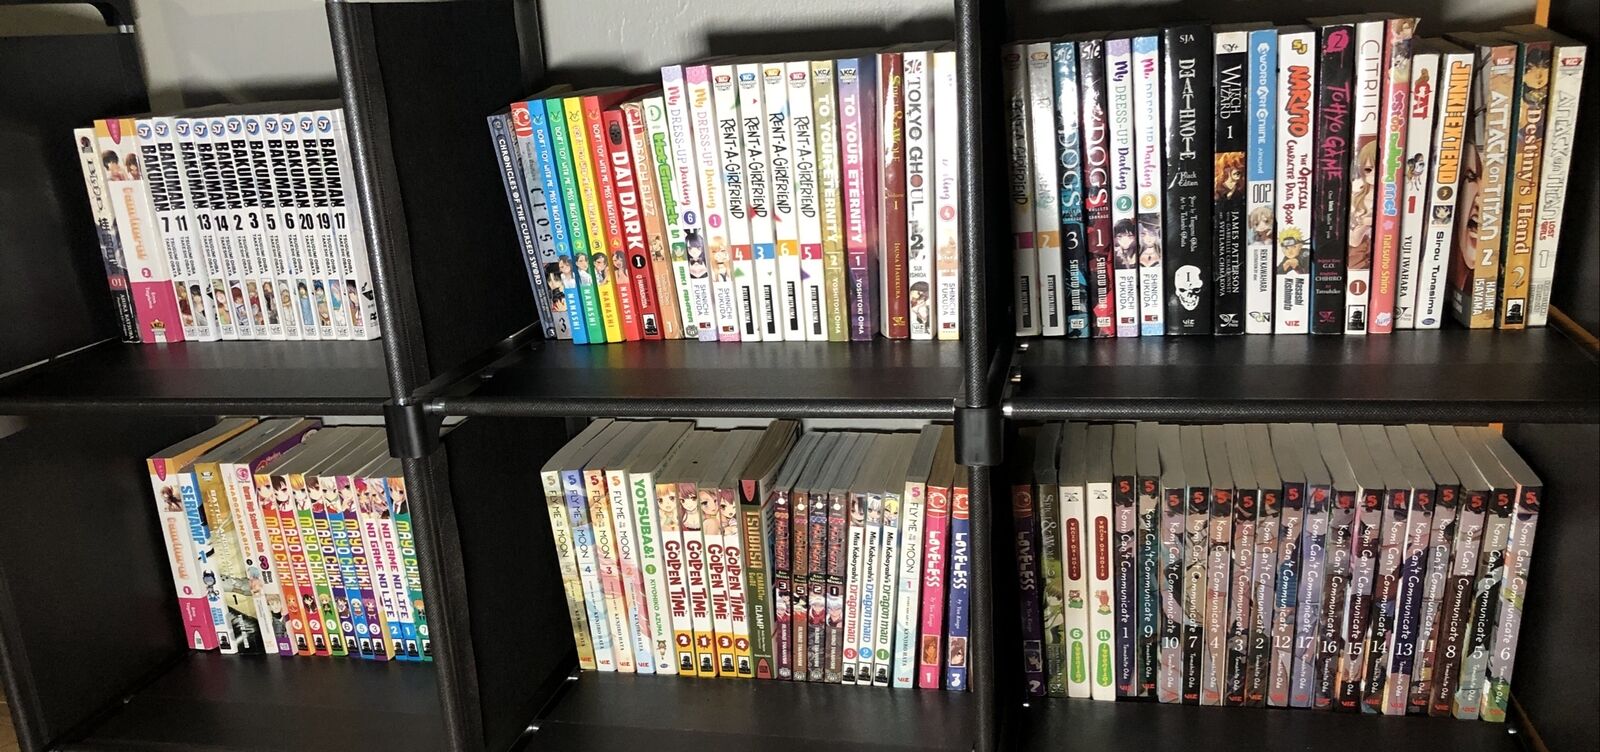 manga lot Of 250   Mixed. Deathnote, One Punch Man,devil Part Timer,Black clover